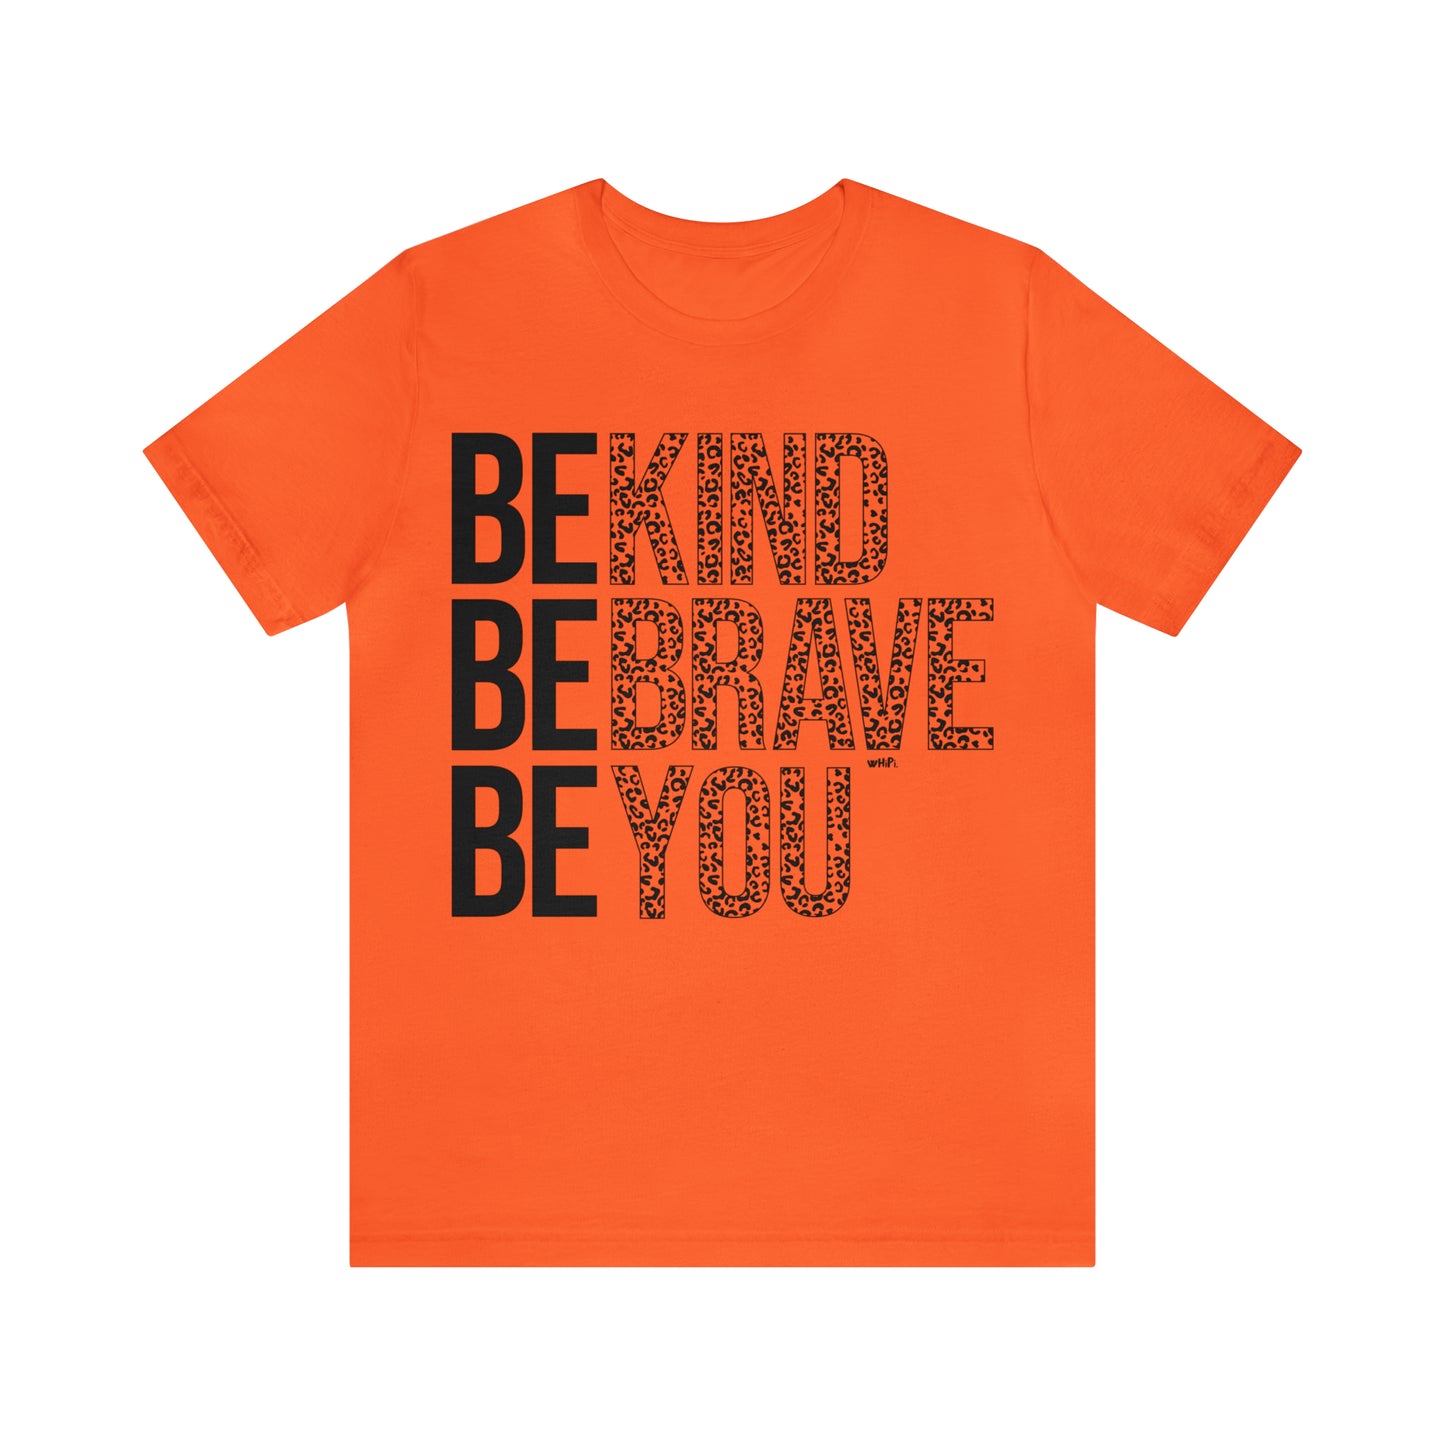 Be Kind Be Brave Be You